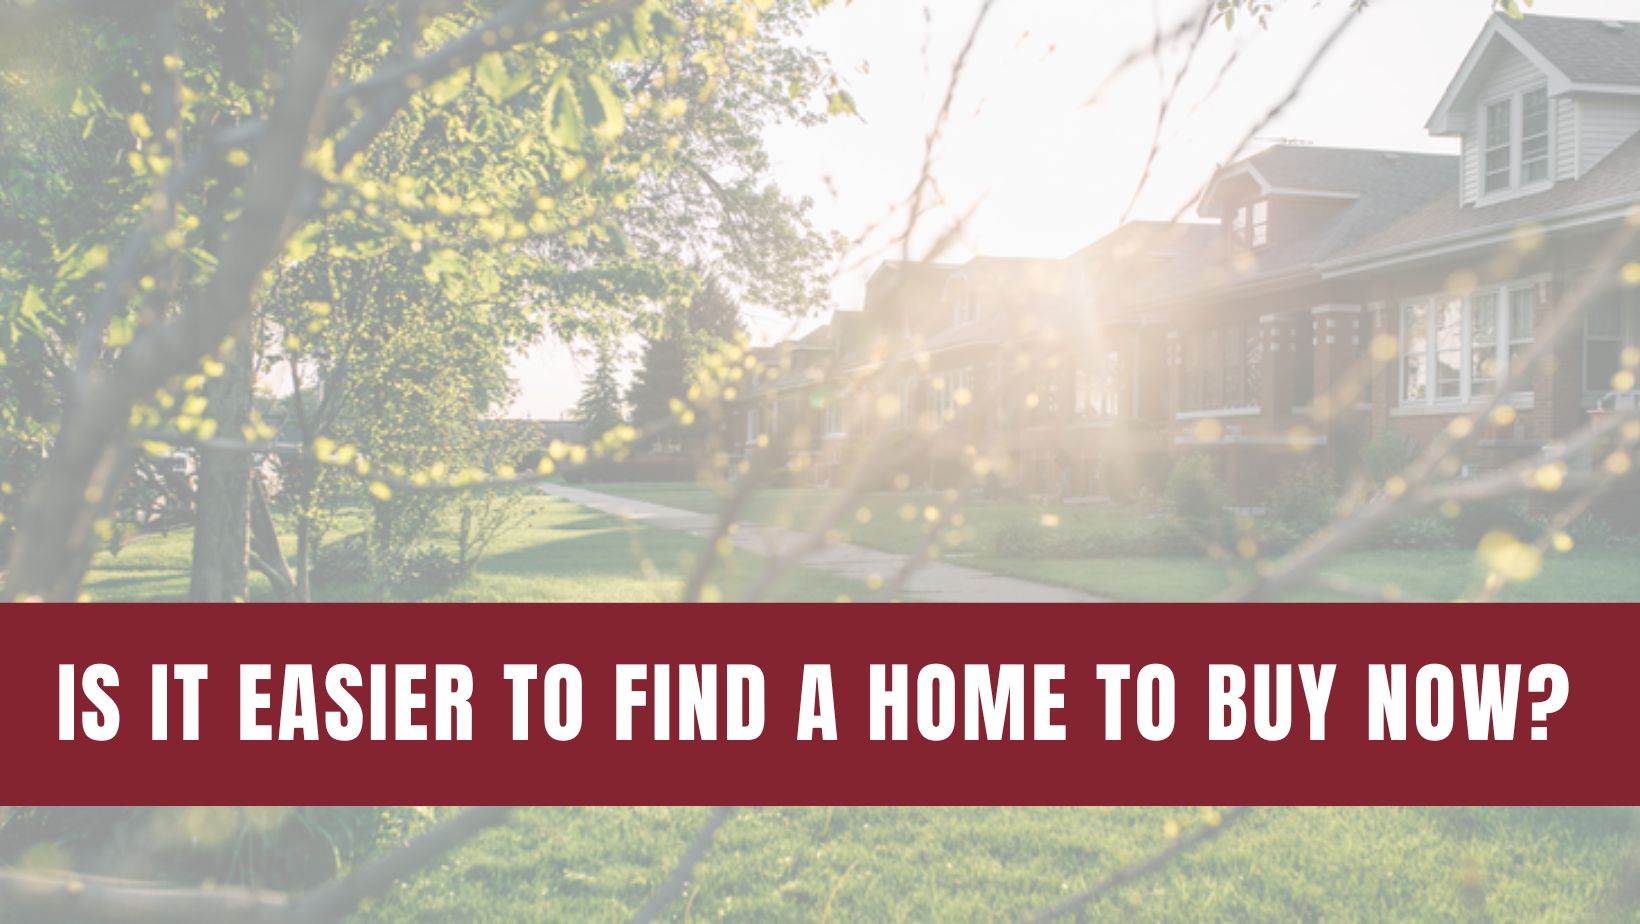 Is It Easier To Find a Home To Buy Now?